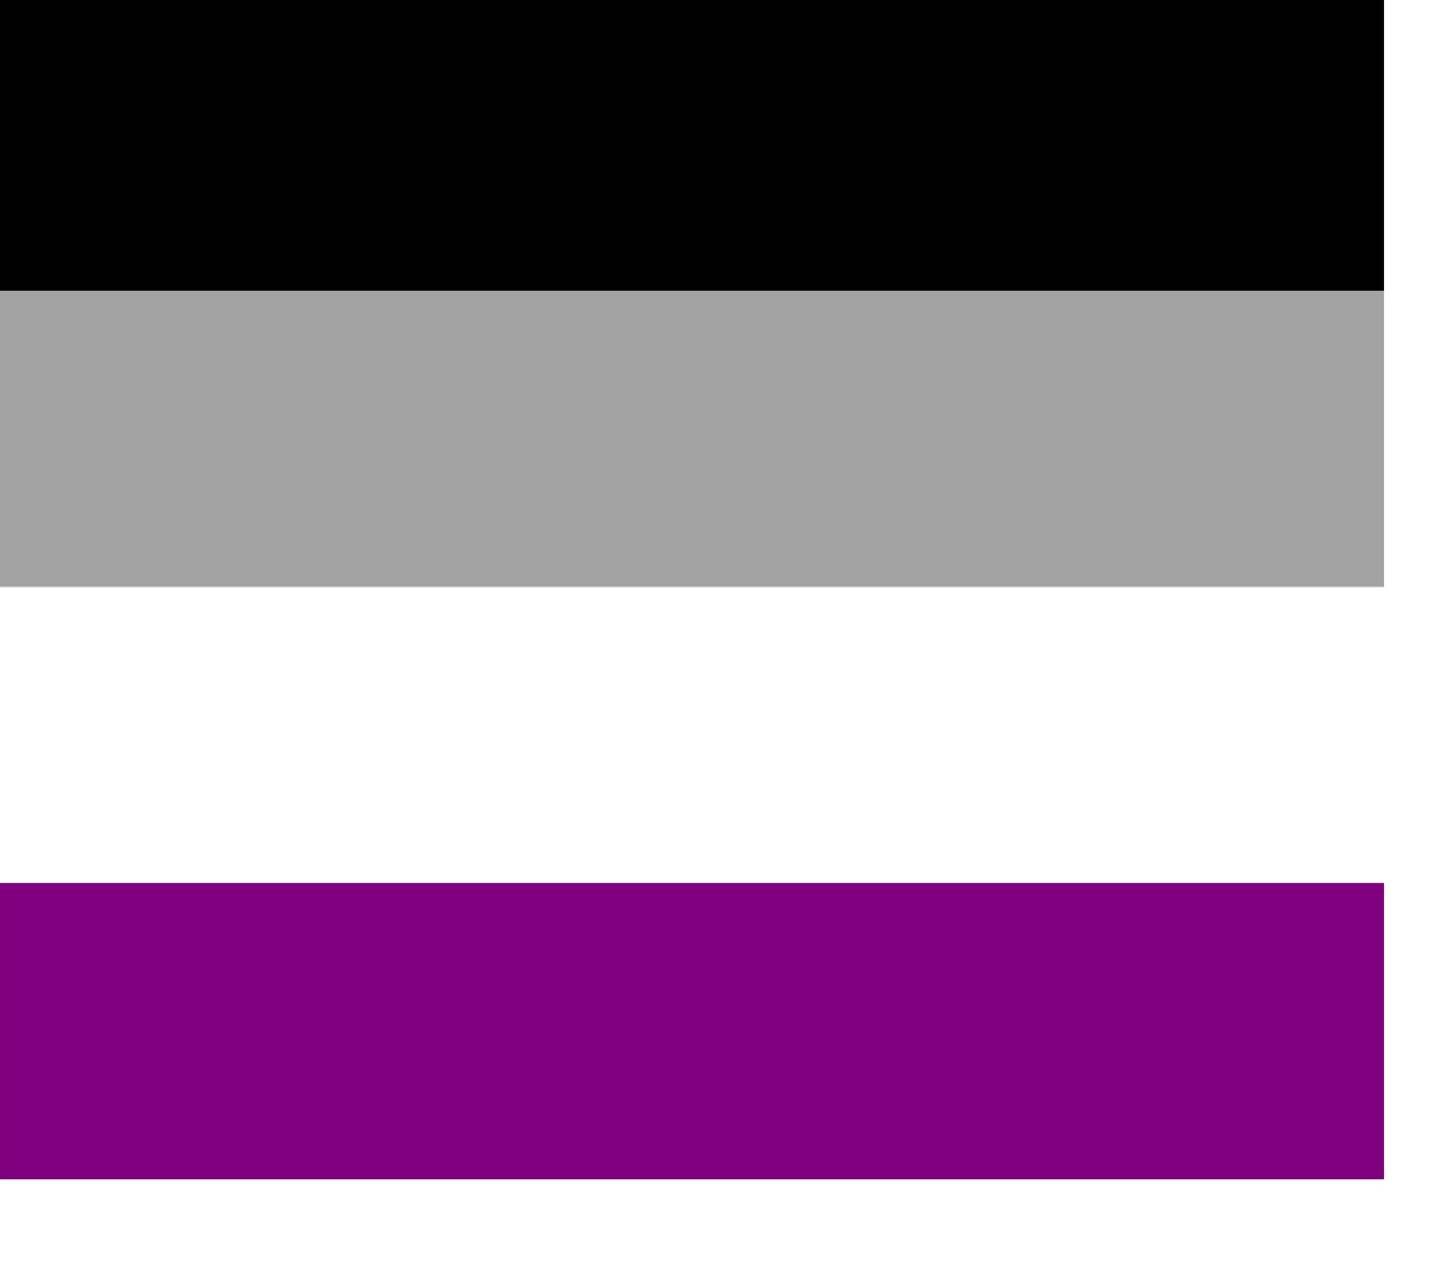 Asexual Wallpaper Free Asexual Background